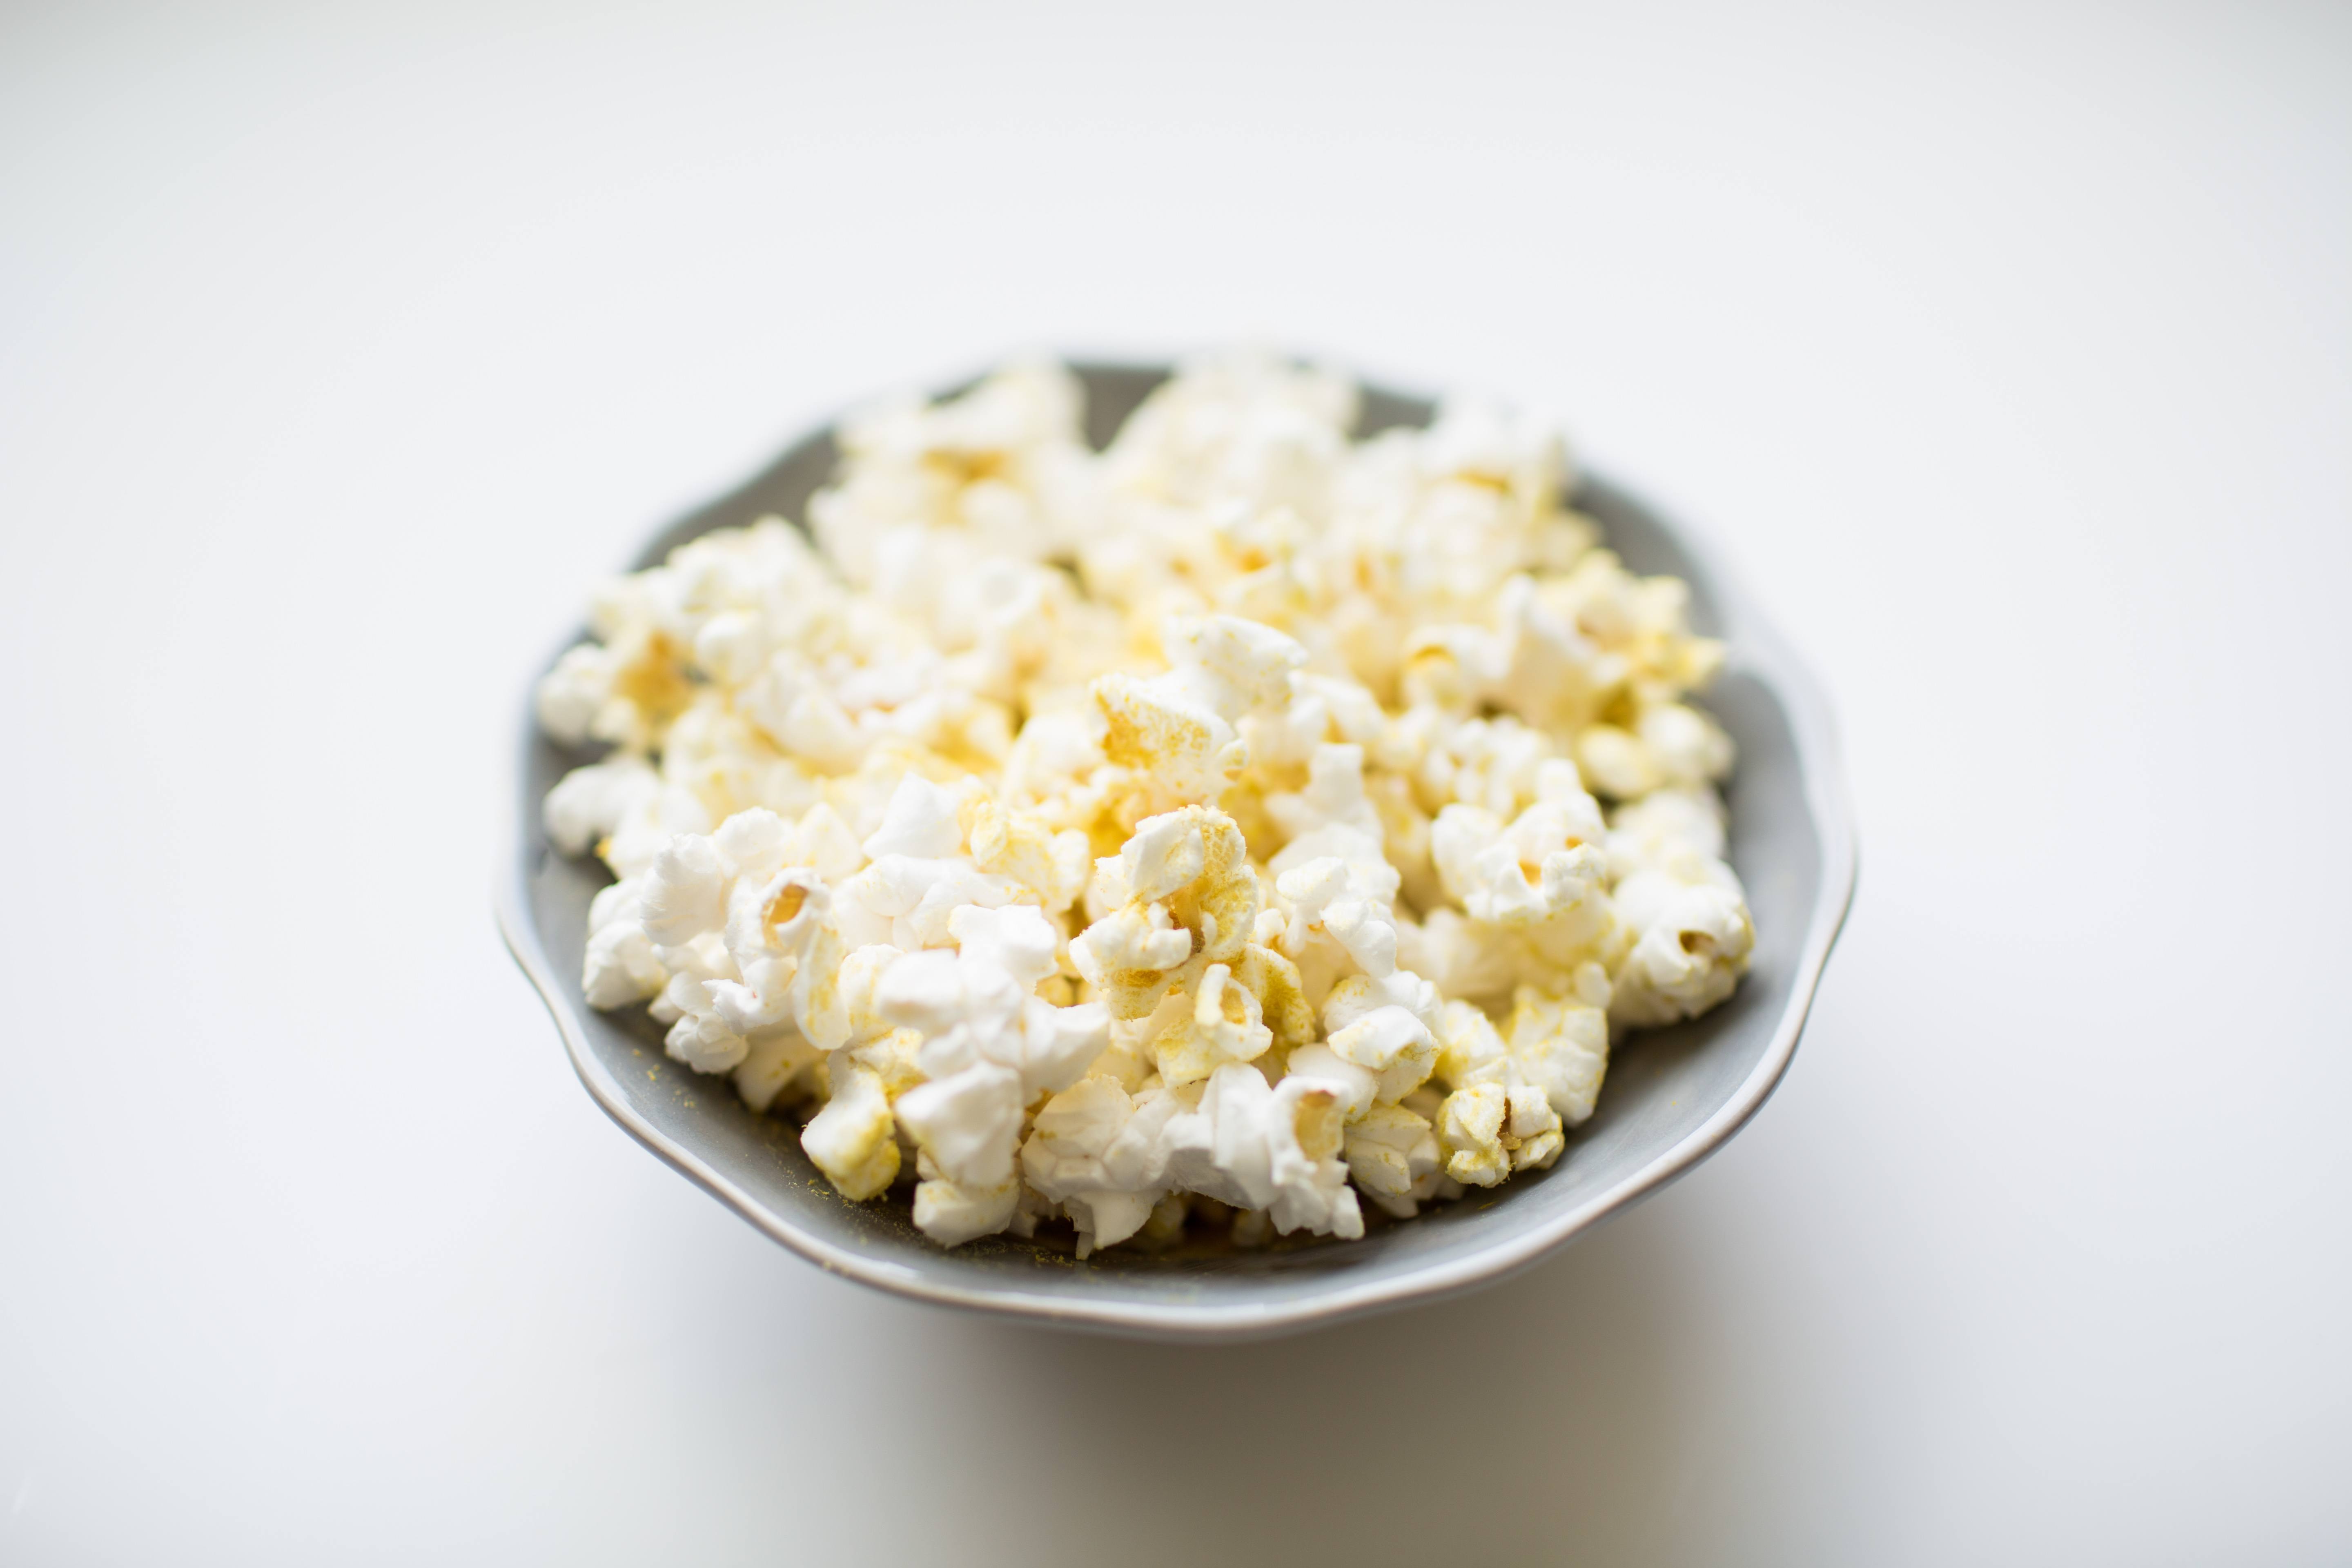 100 calorie snack popcorn and nutritional yeast